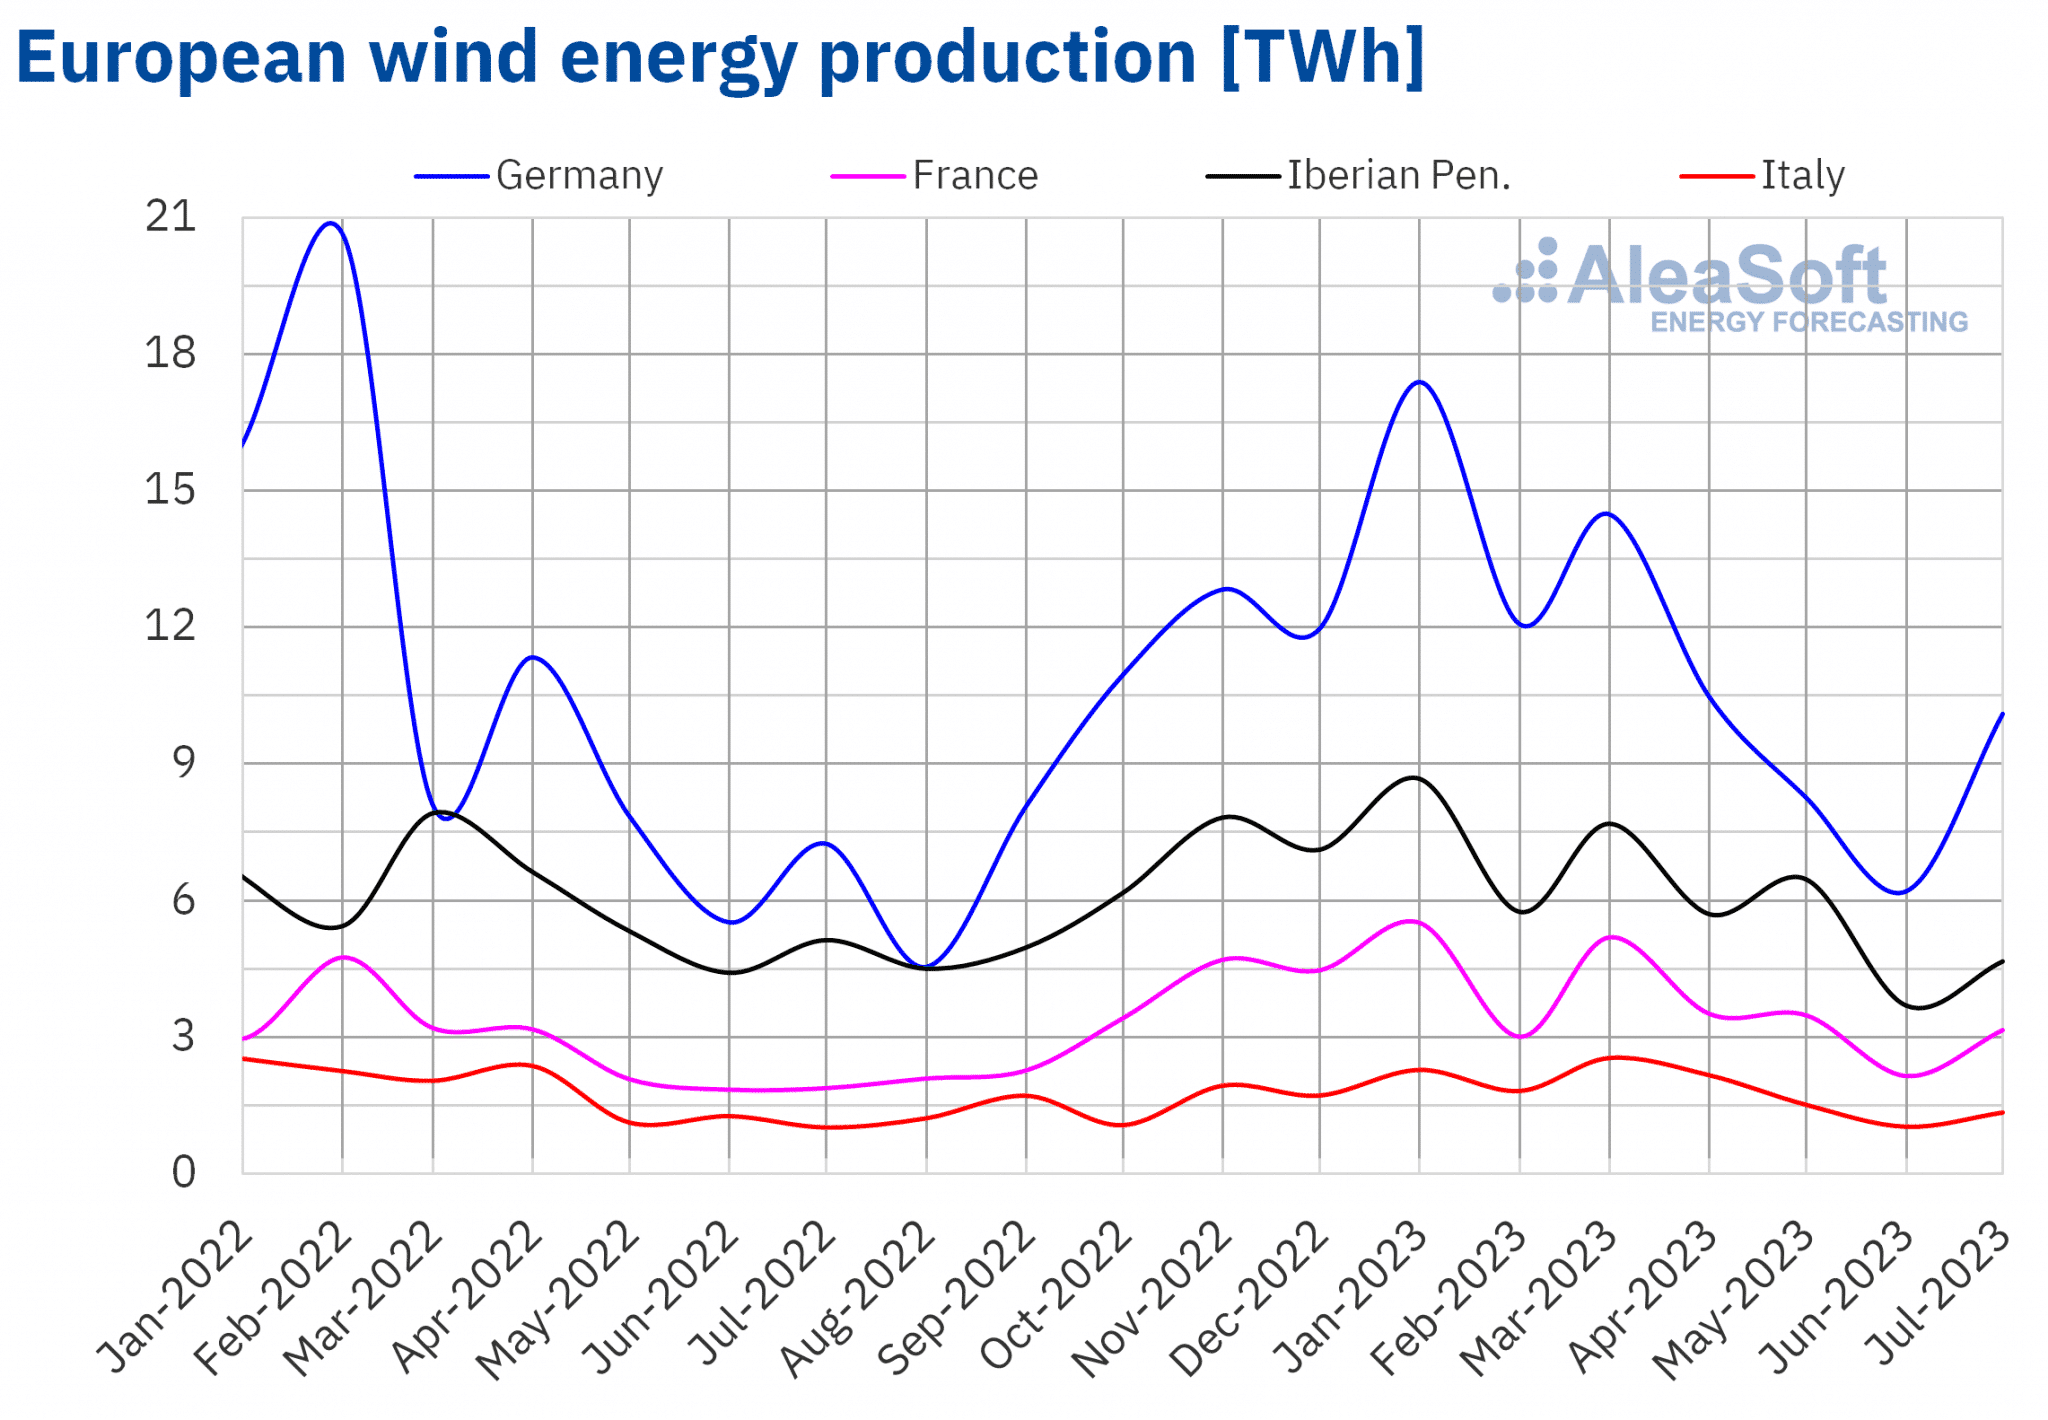 AleaSoft - Monthly wind energy production electricity Europe